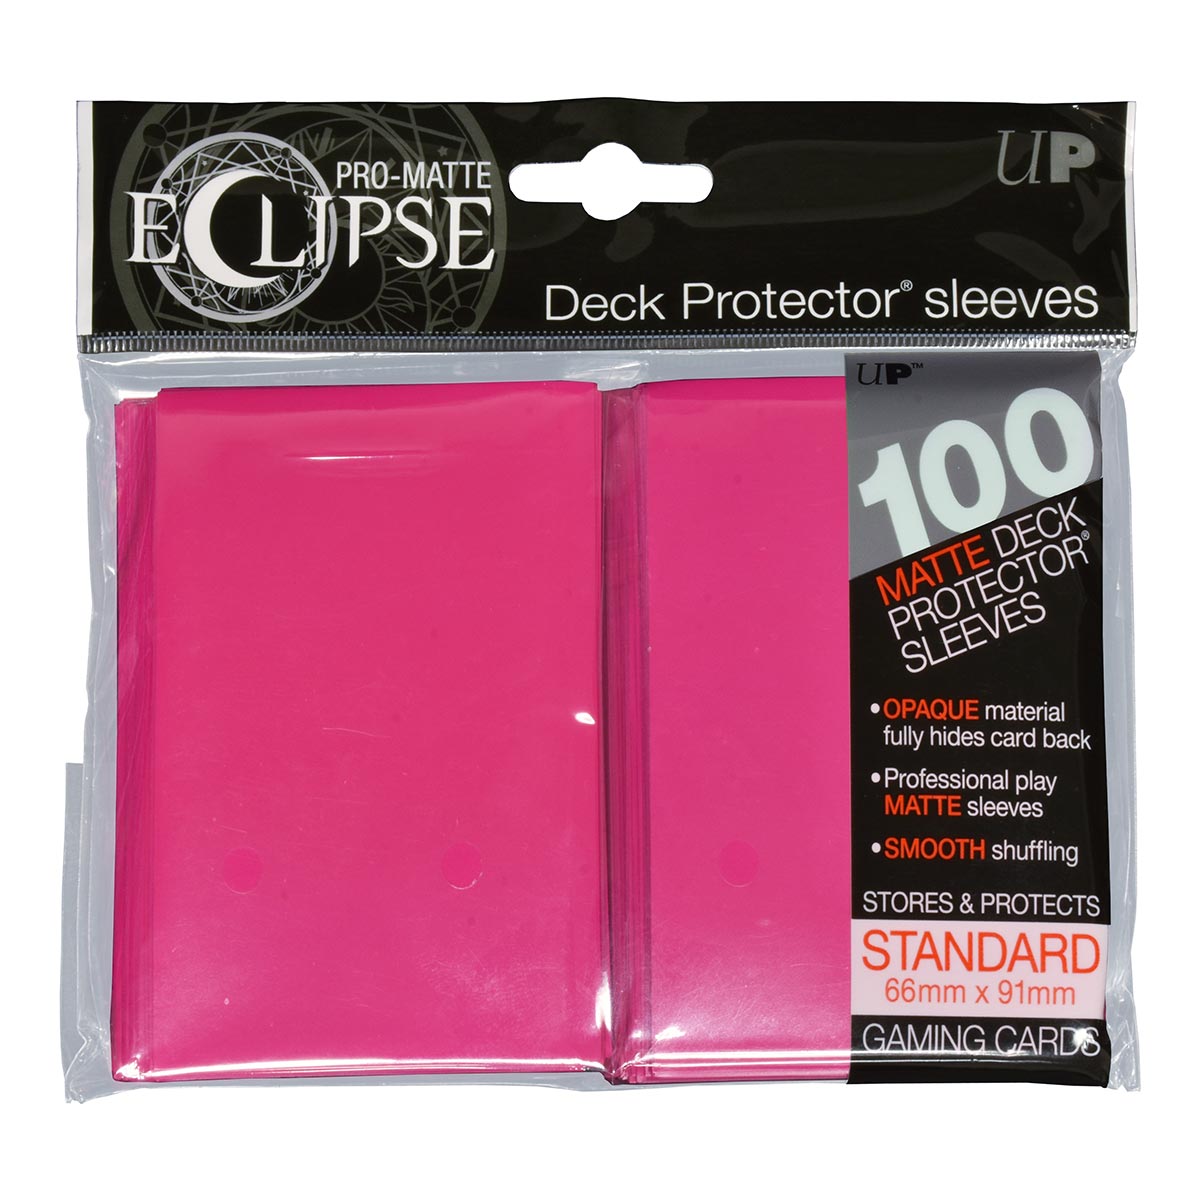 Ultra Pro-Matte Bright Pink Deck Protector 50ct Card Sleeves Standard 